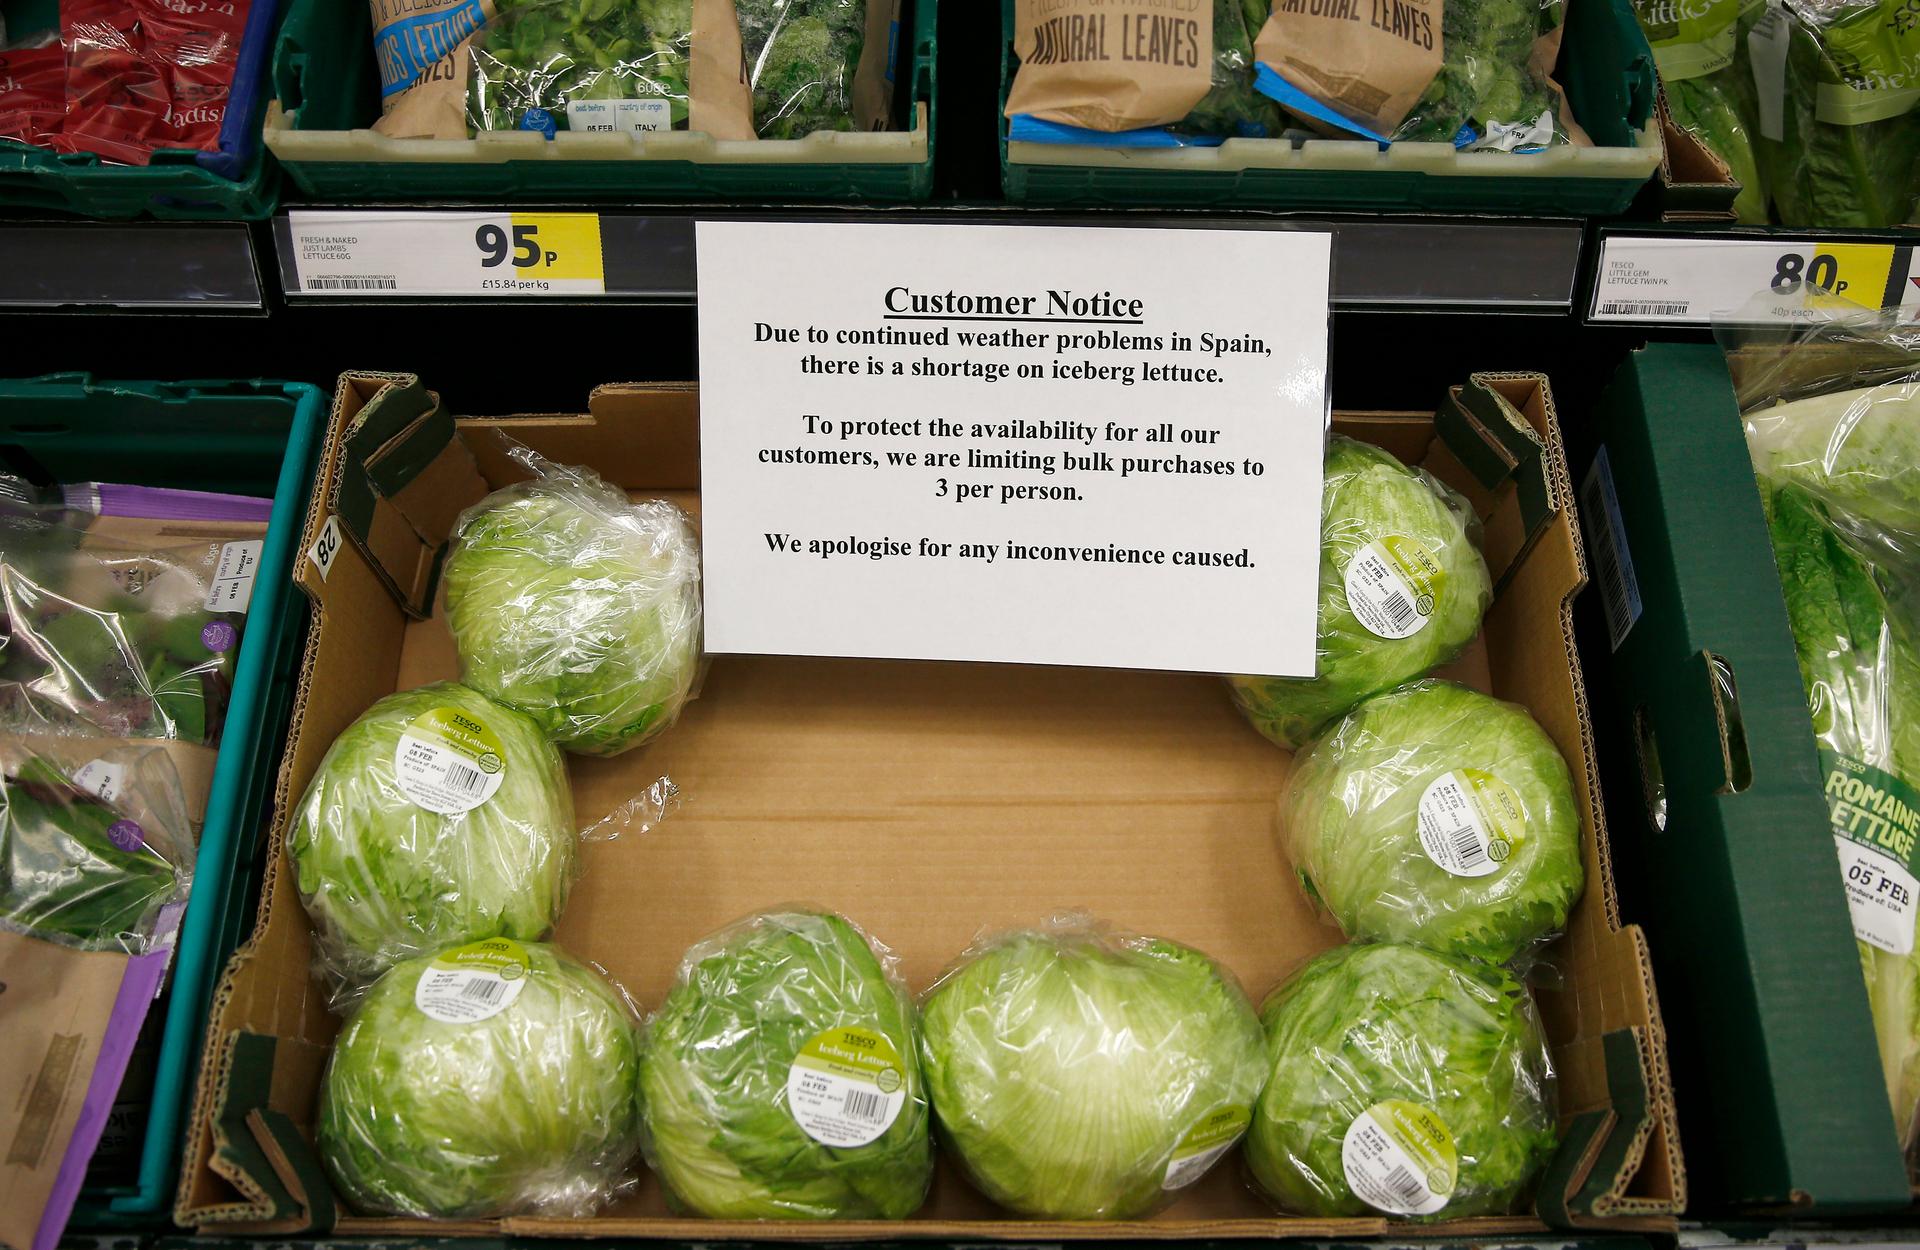 Iceberg lettuces are seen next to a sign requesting that customers limit their purchase in a supermarket, in London, Britain February 3, 2017.